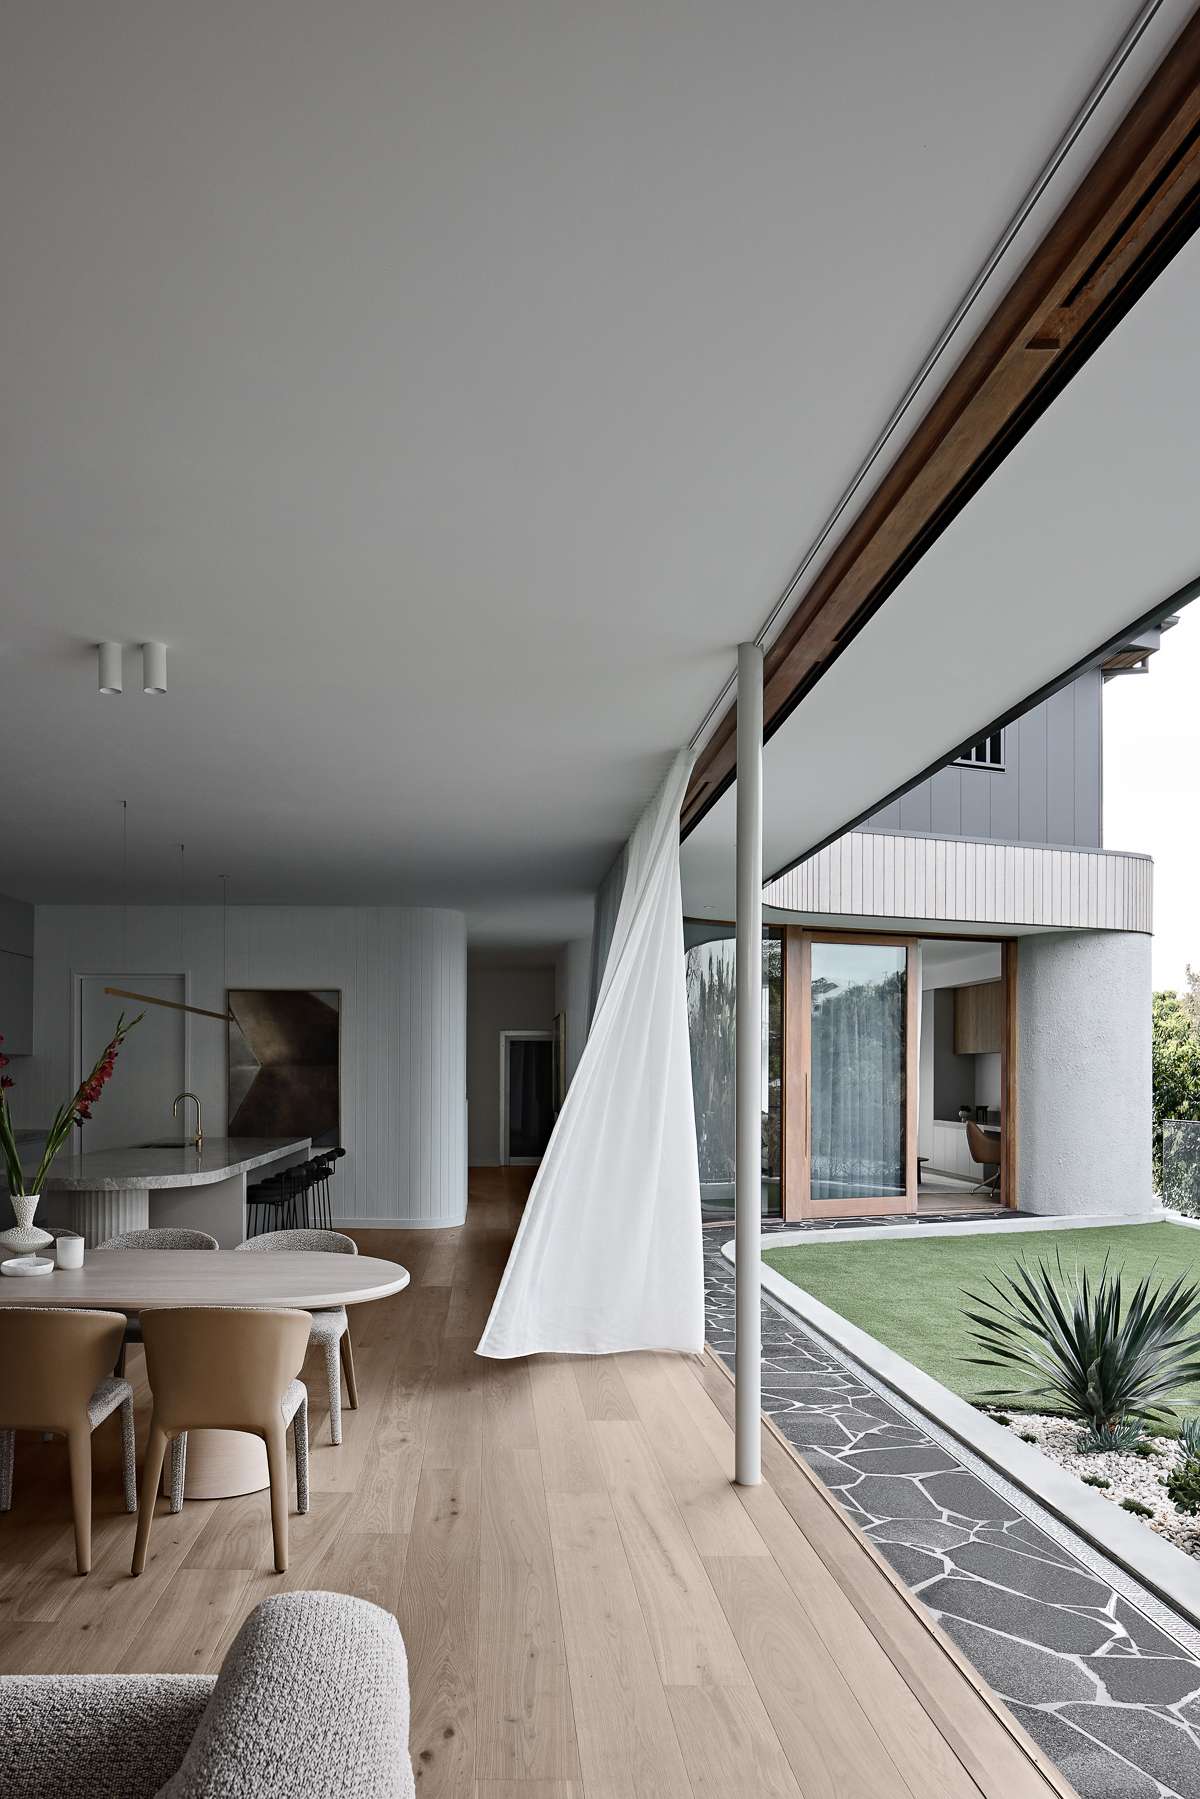 Amiri Courtyard House by Kelder Architects showing inside / outside connection